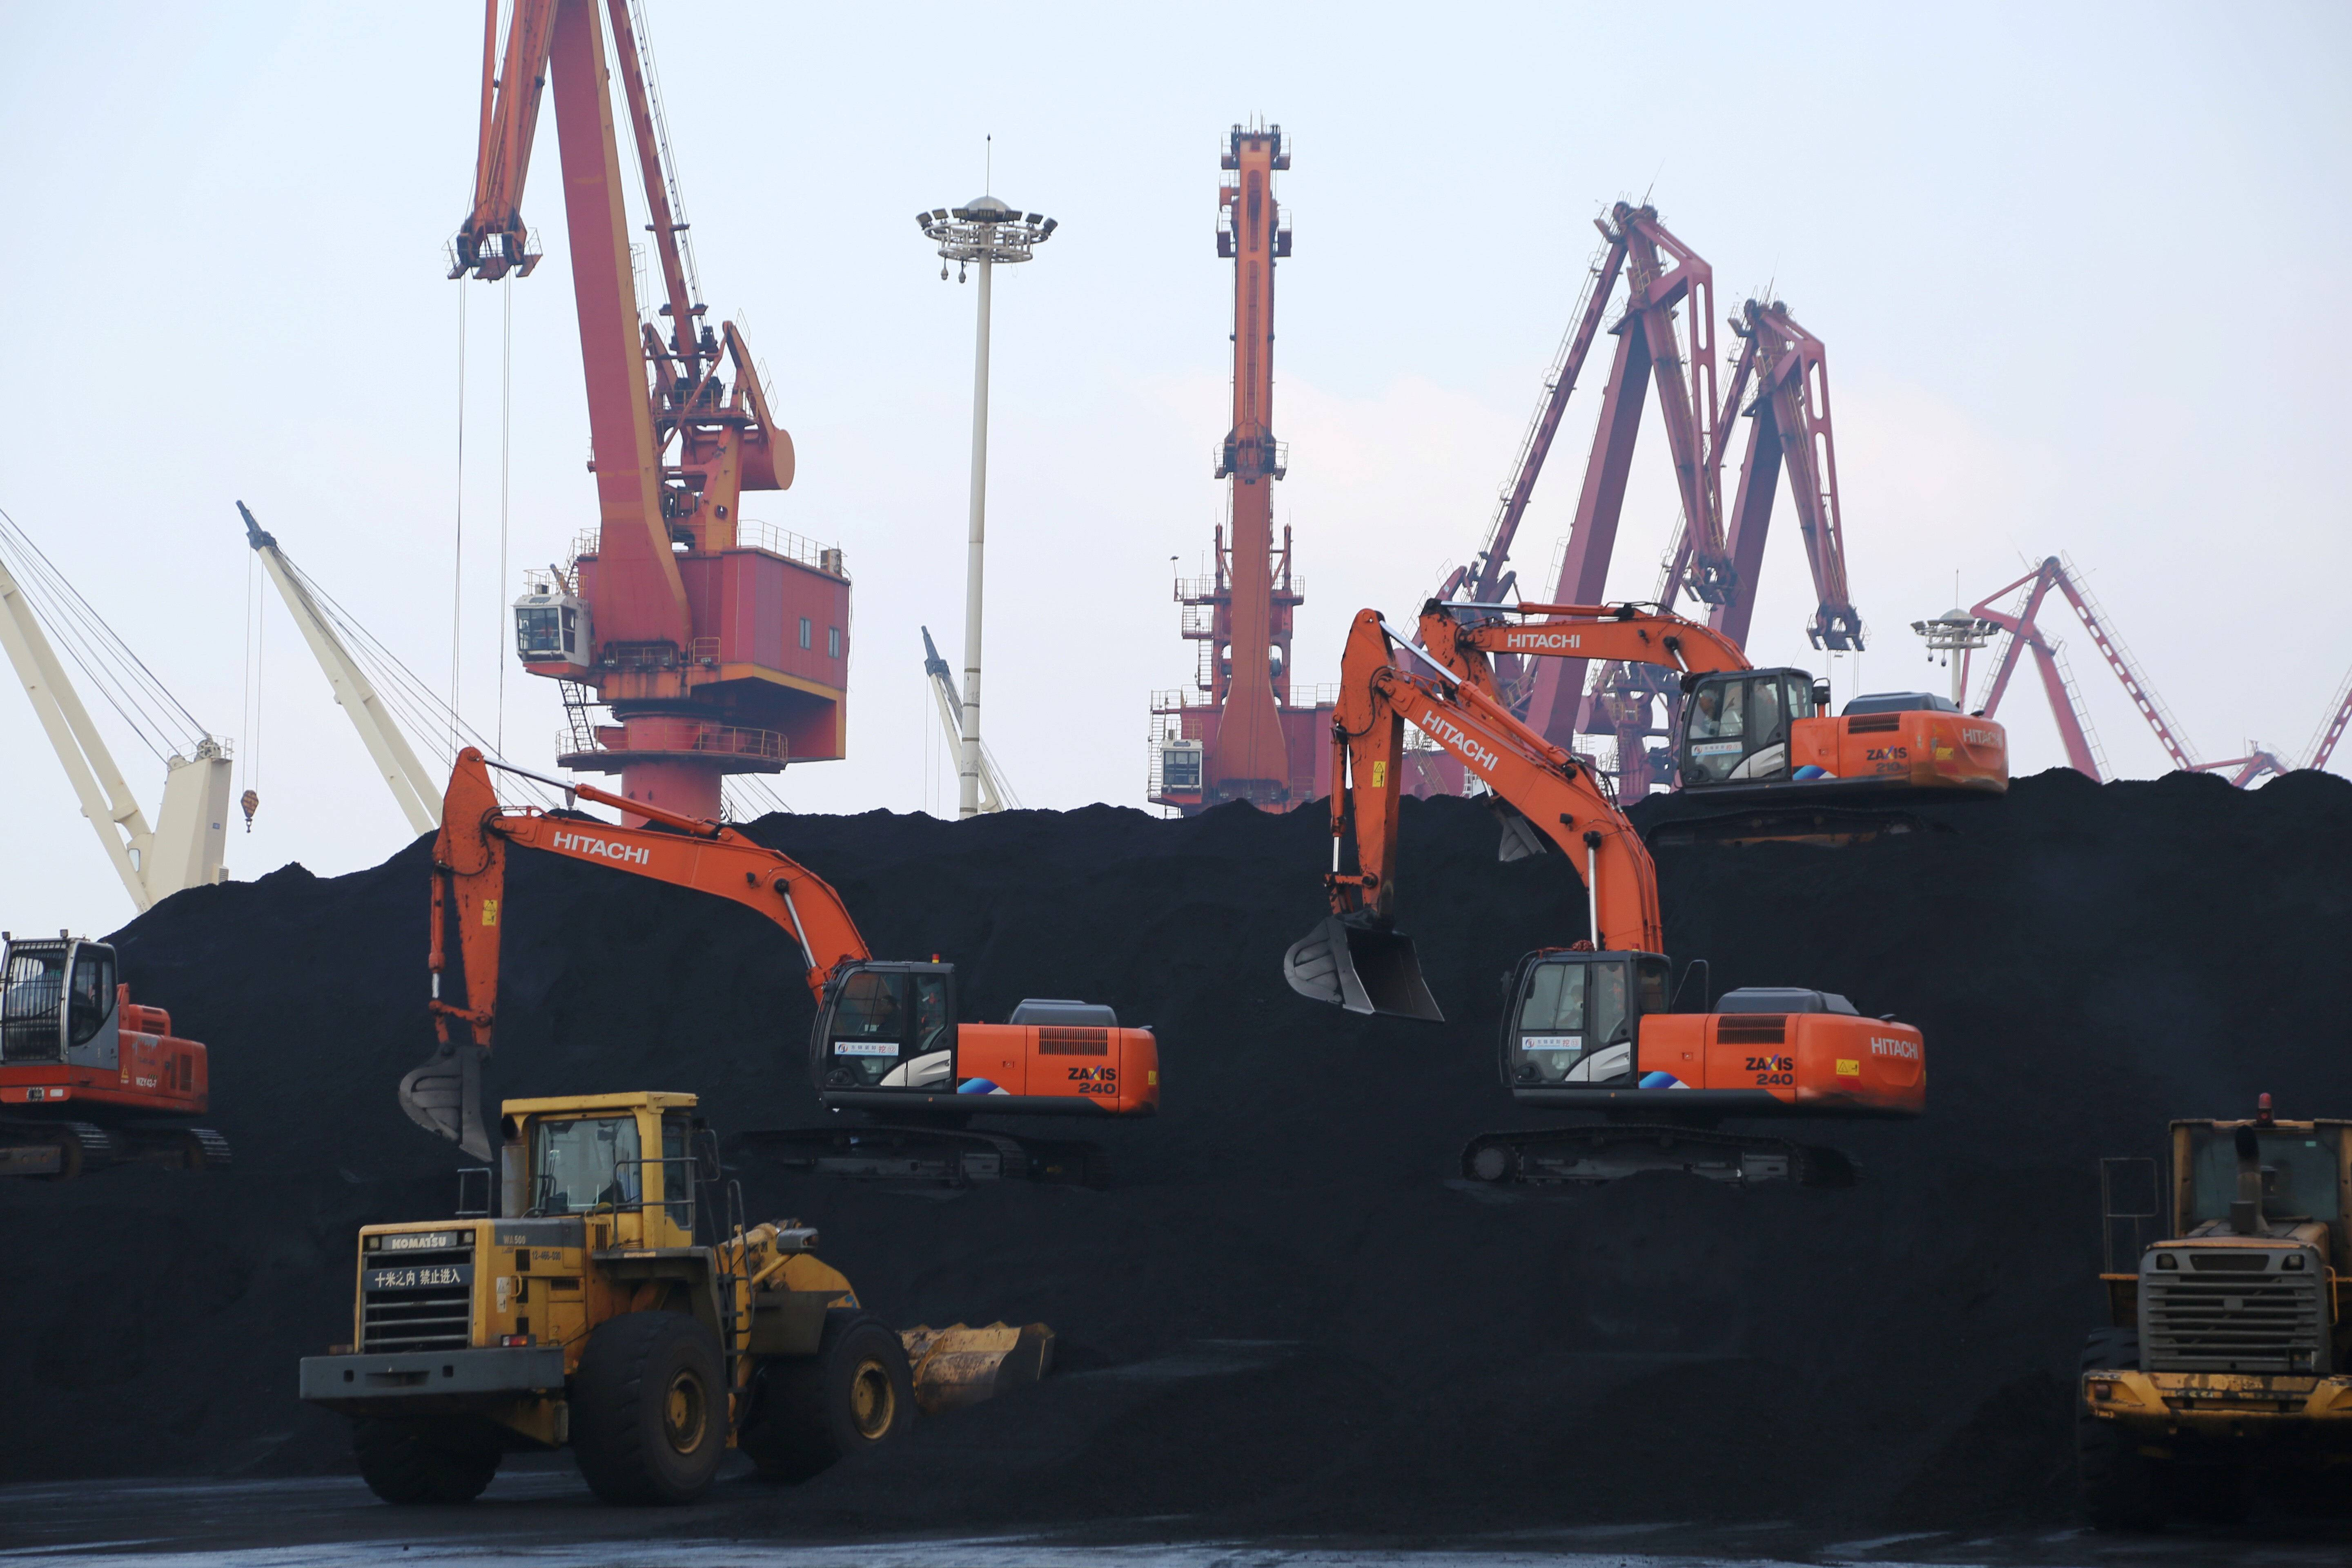 Imported coal is unloaded at a port in China’s Jiangsu province. Photo: Reuters